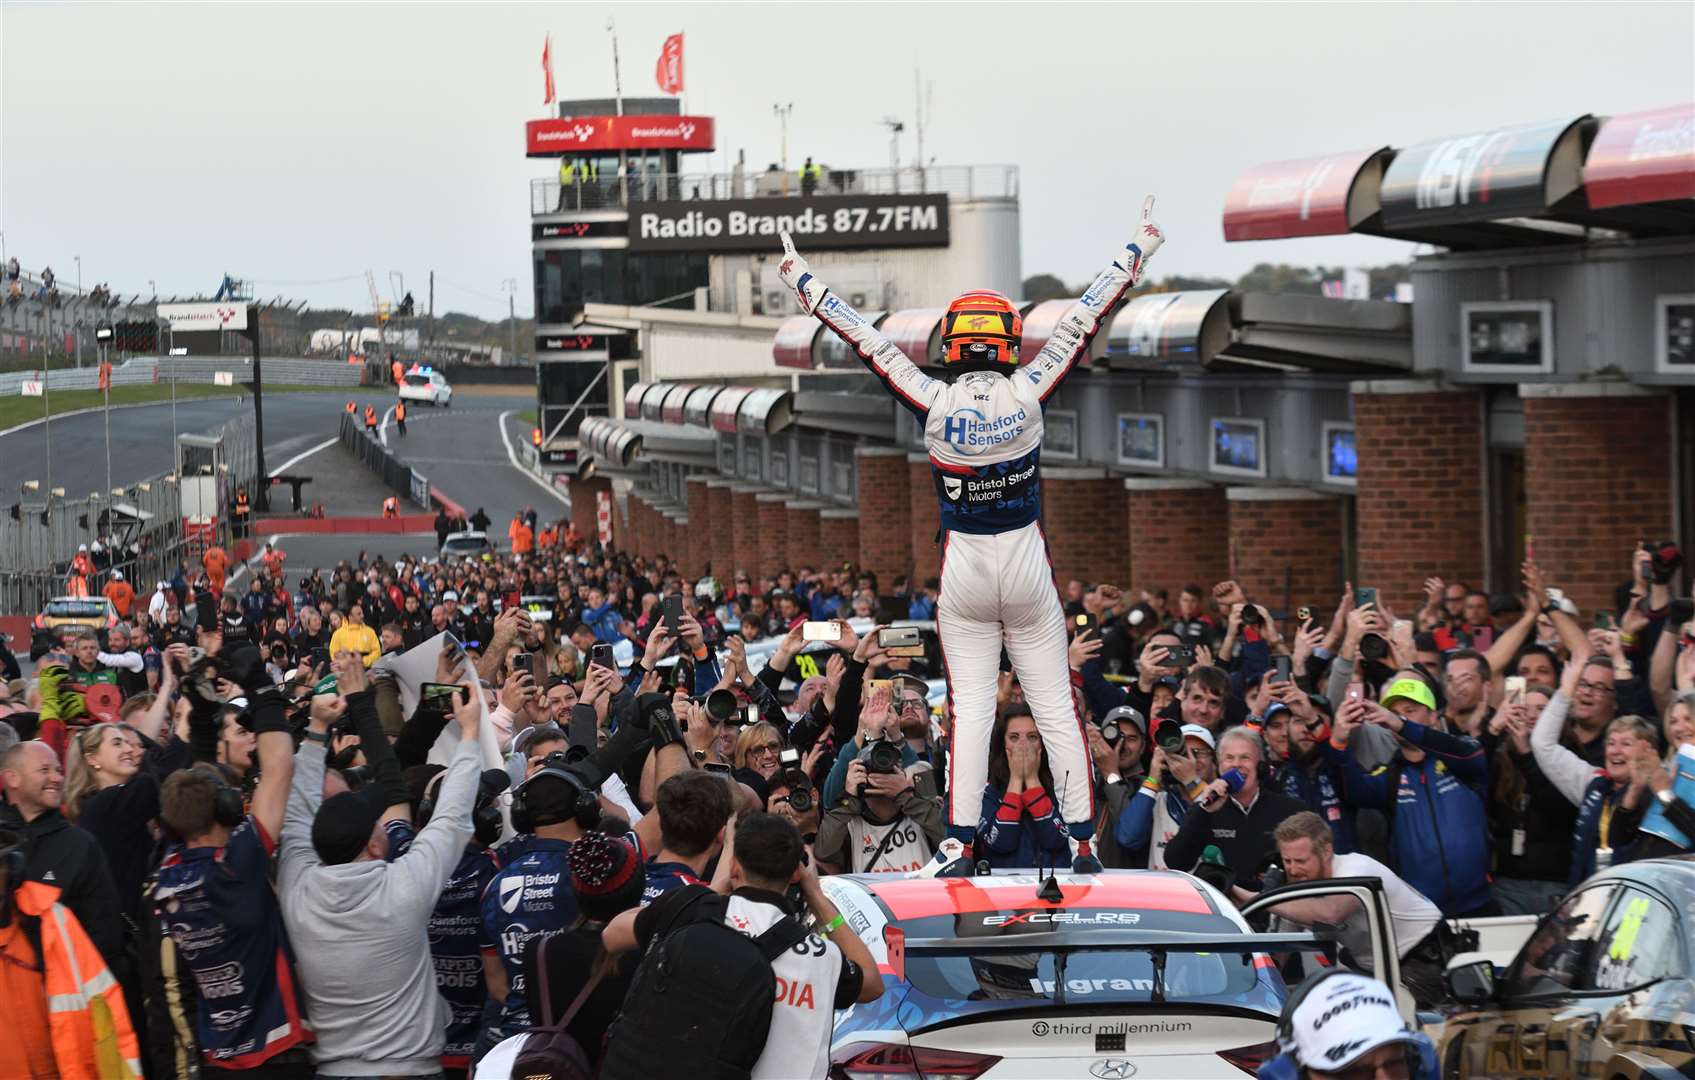 Hyundai i30N pilot Ingram secured his first BTCC crown; he won the first two races on Sunday before team-mate Dan Lloyd triumphed in the finale